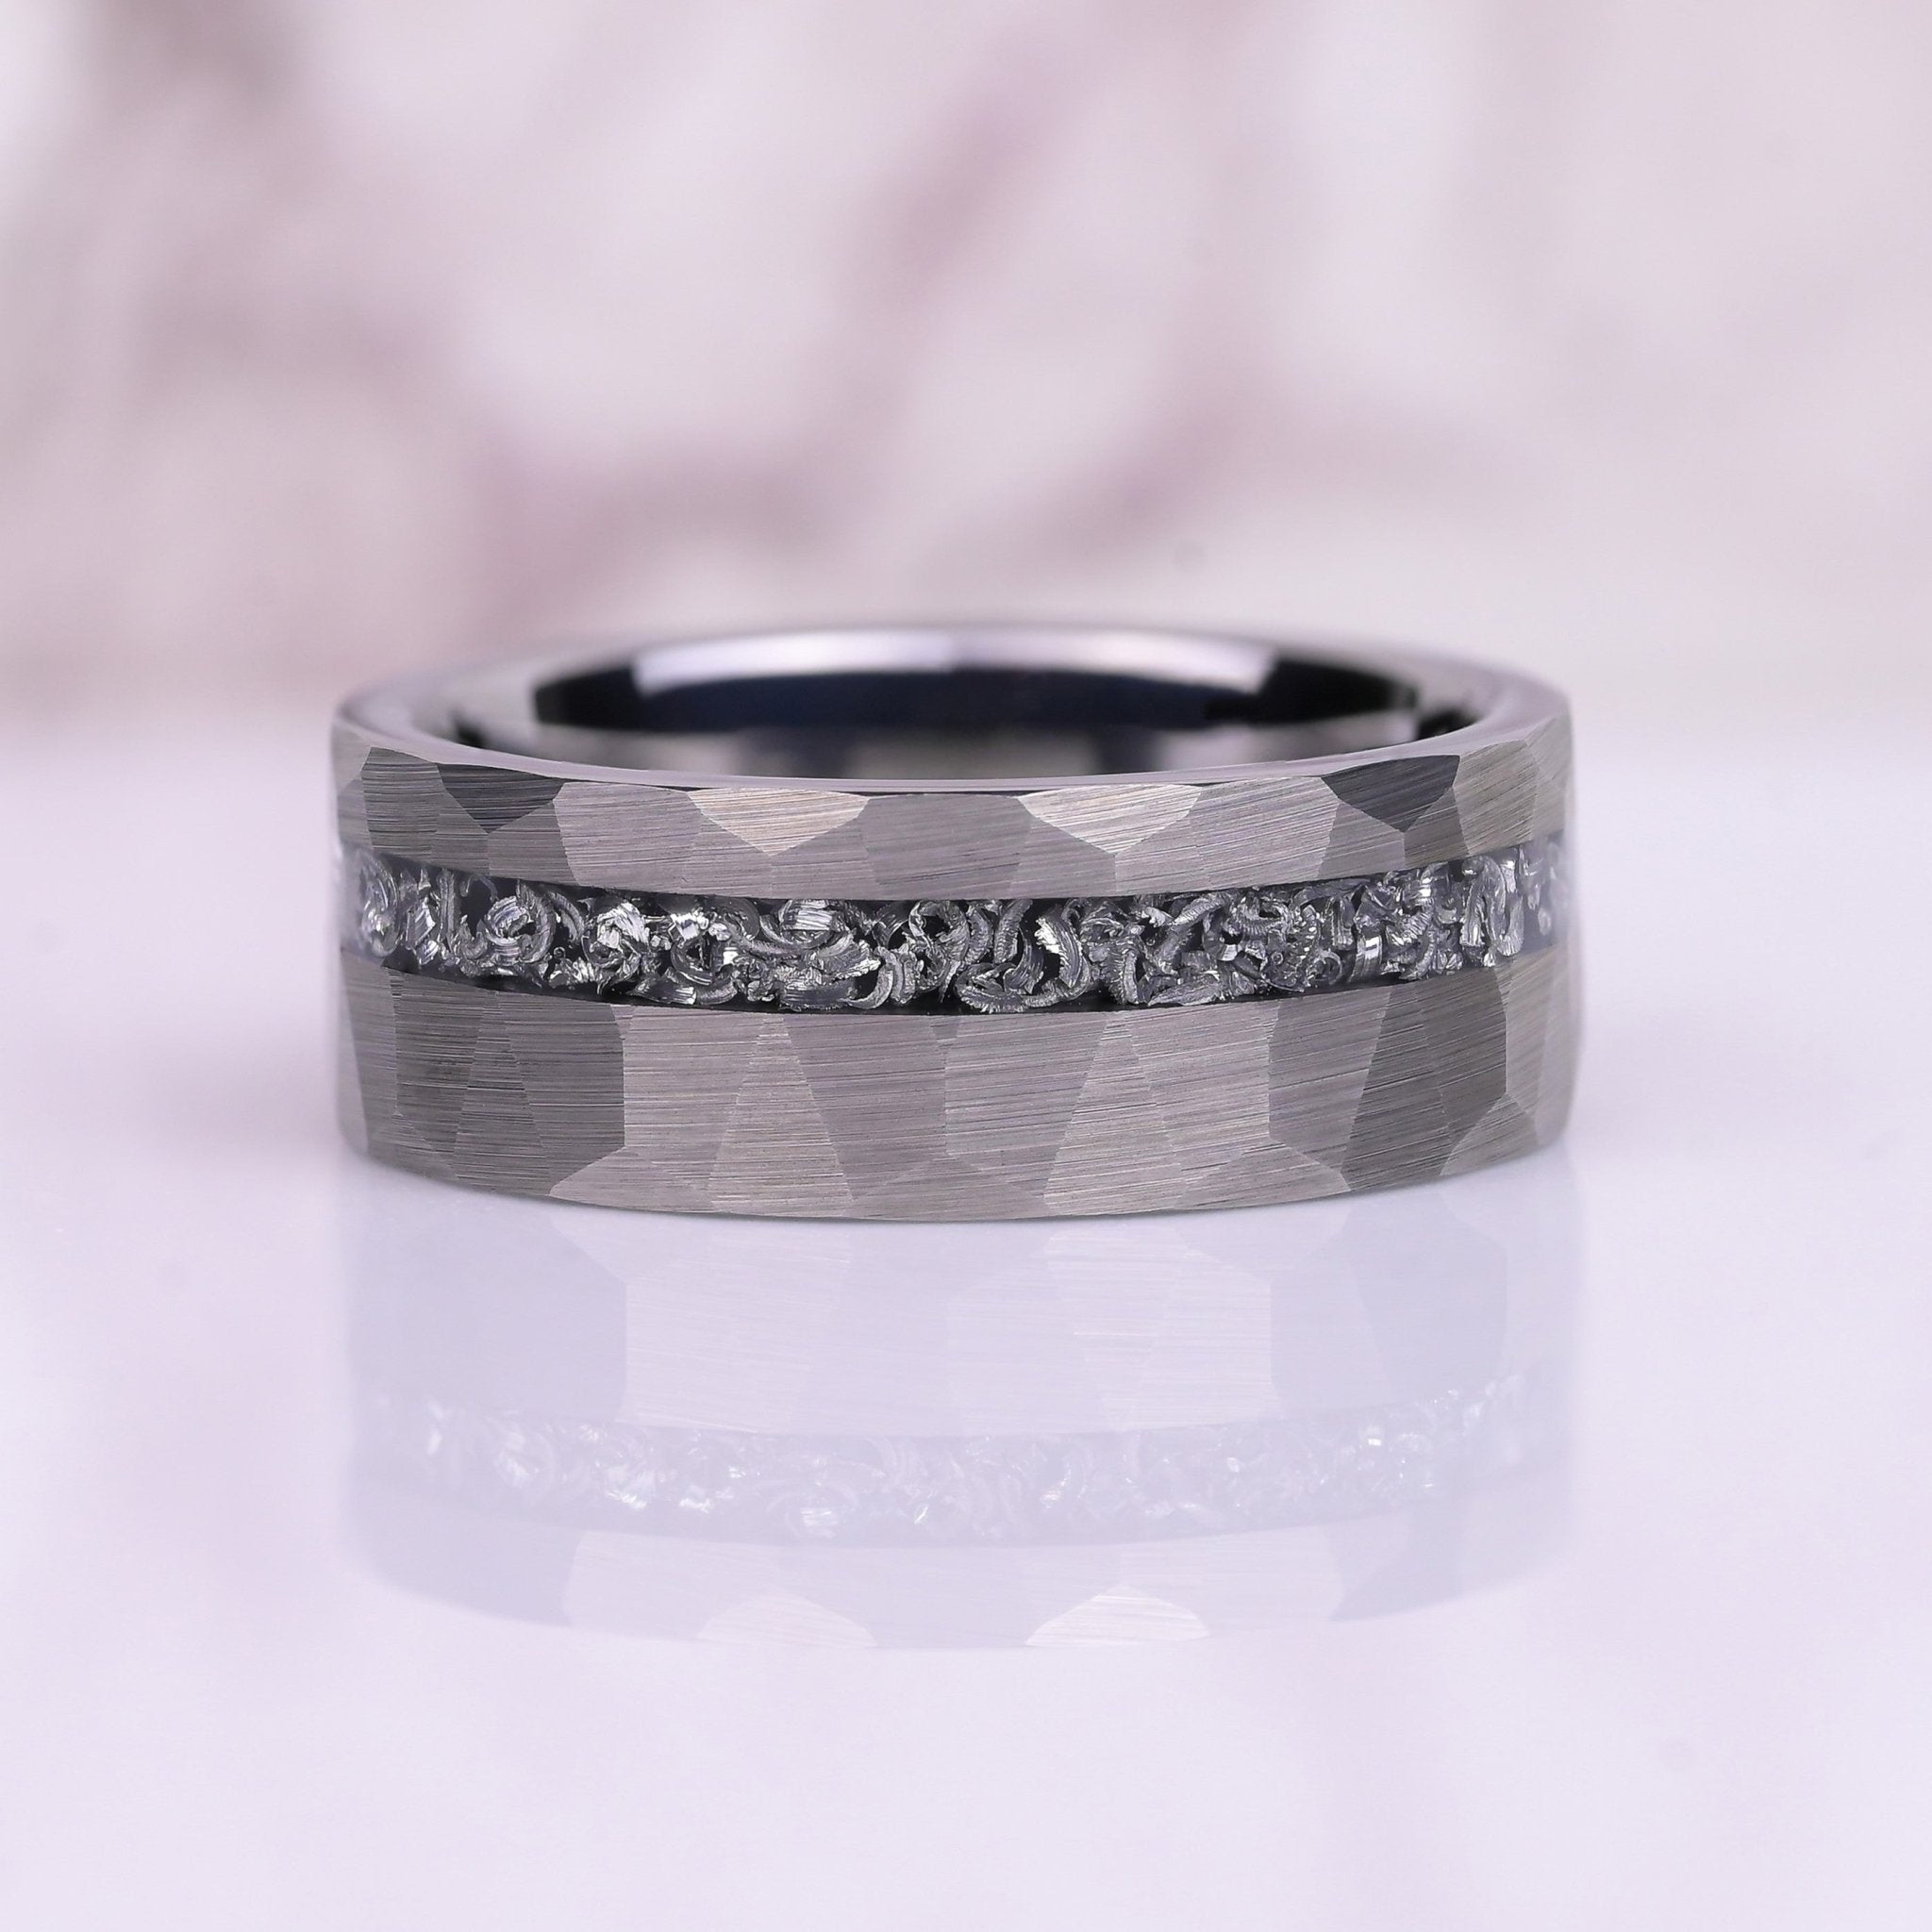 The Silversmith - Mens Wedding Band - Silver Hammered Tungsten Ring - Meteorite Inlay